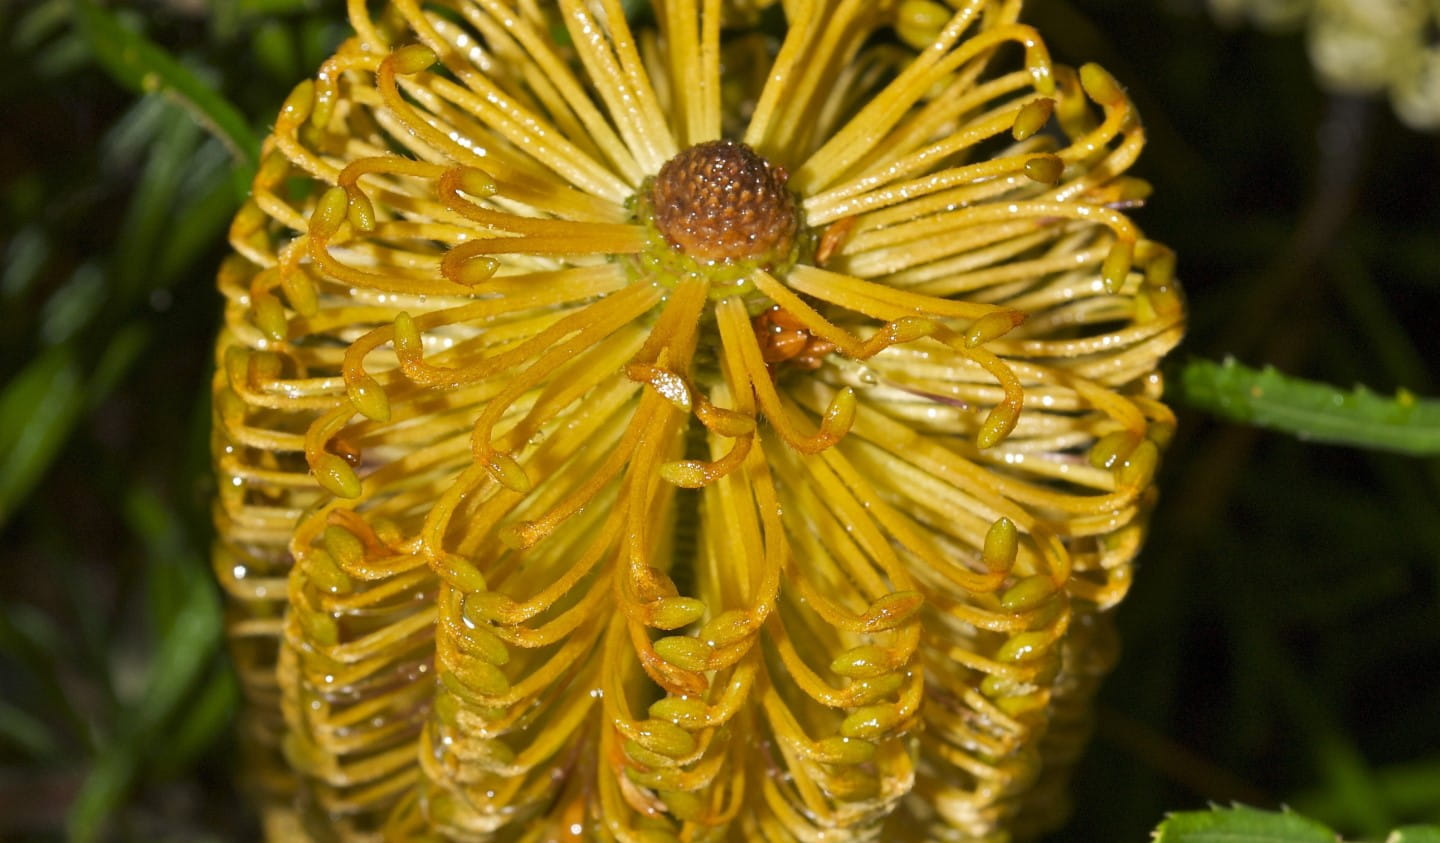 A close-up shot of a yellow banksia plant